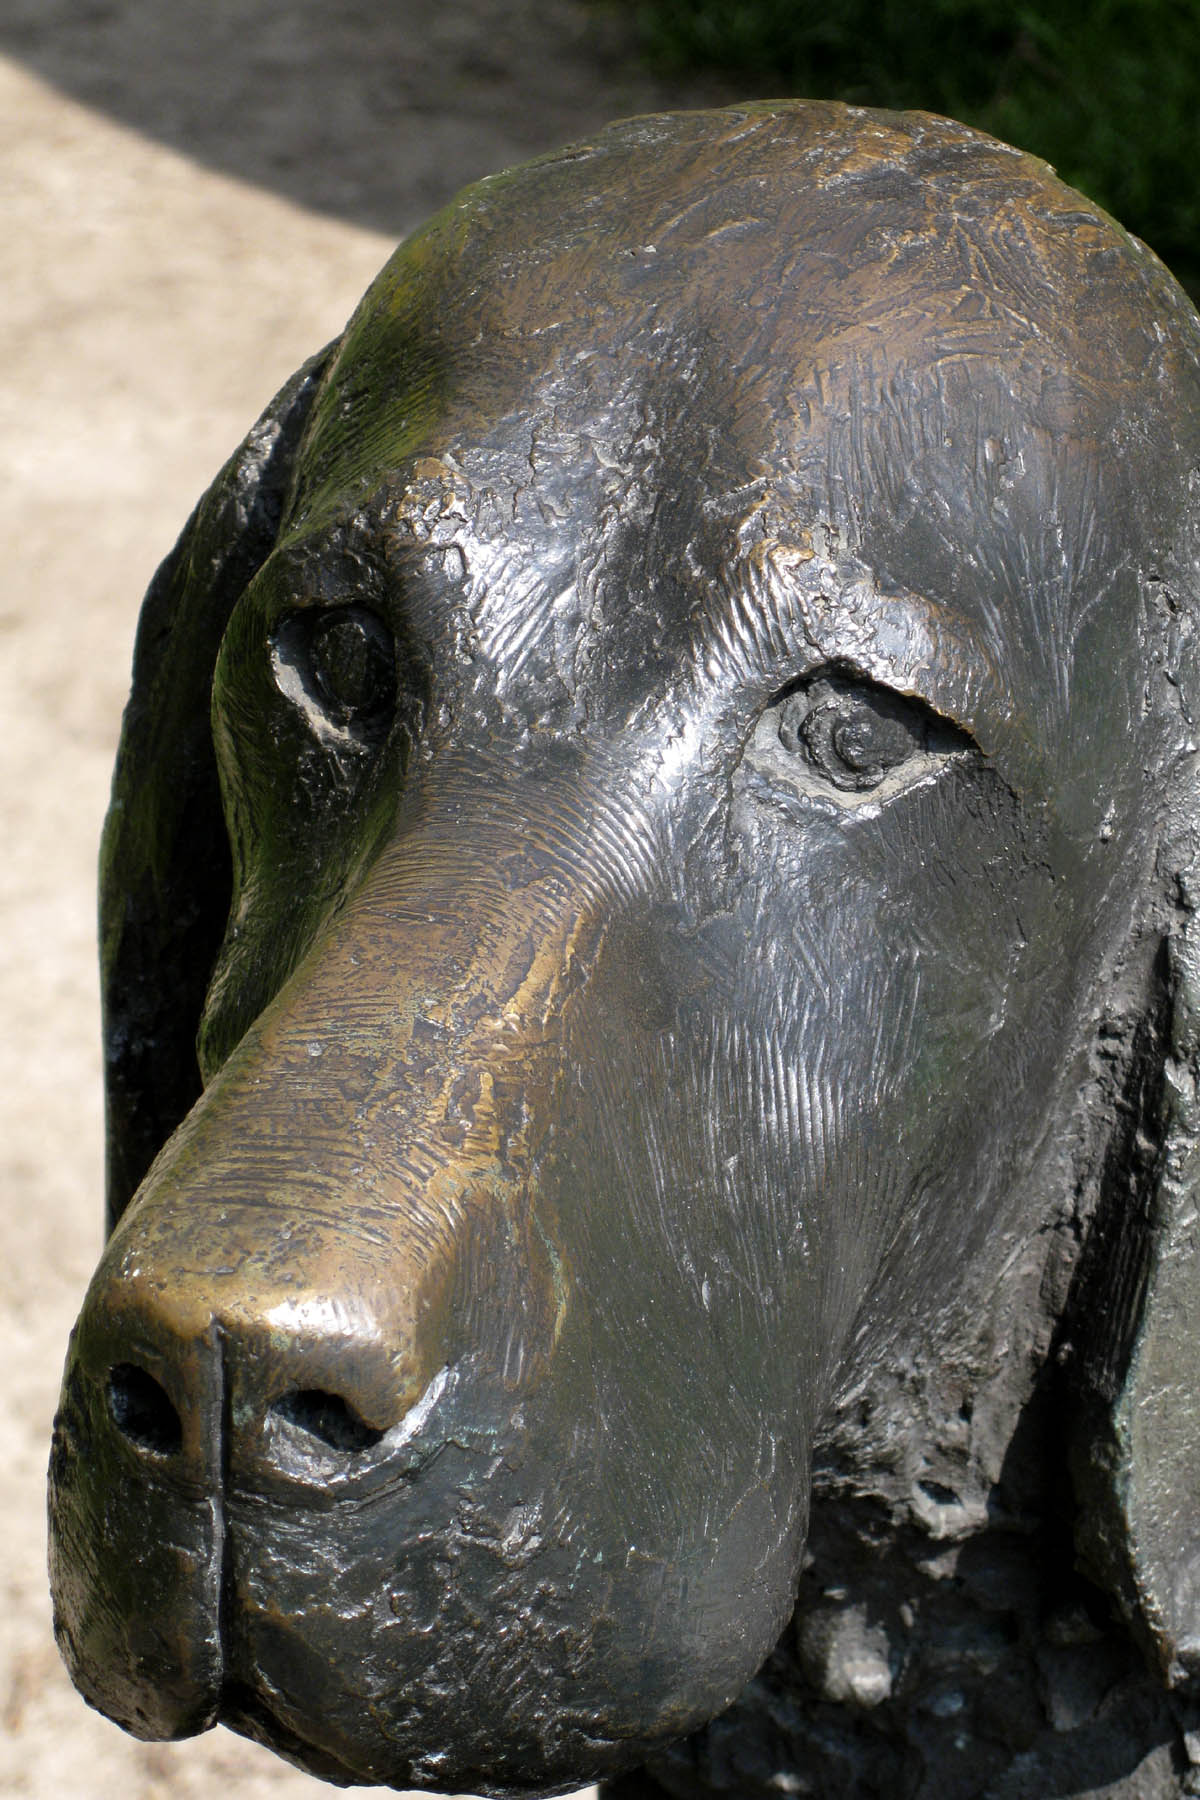 there is a bronze statue of a dog